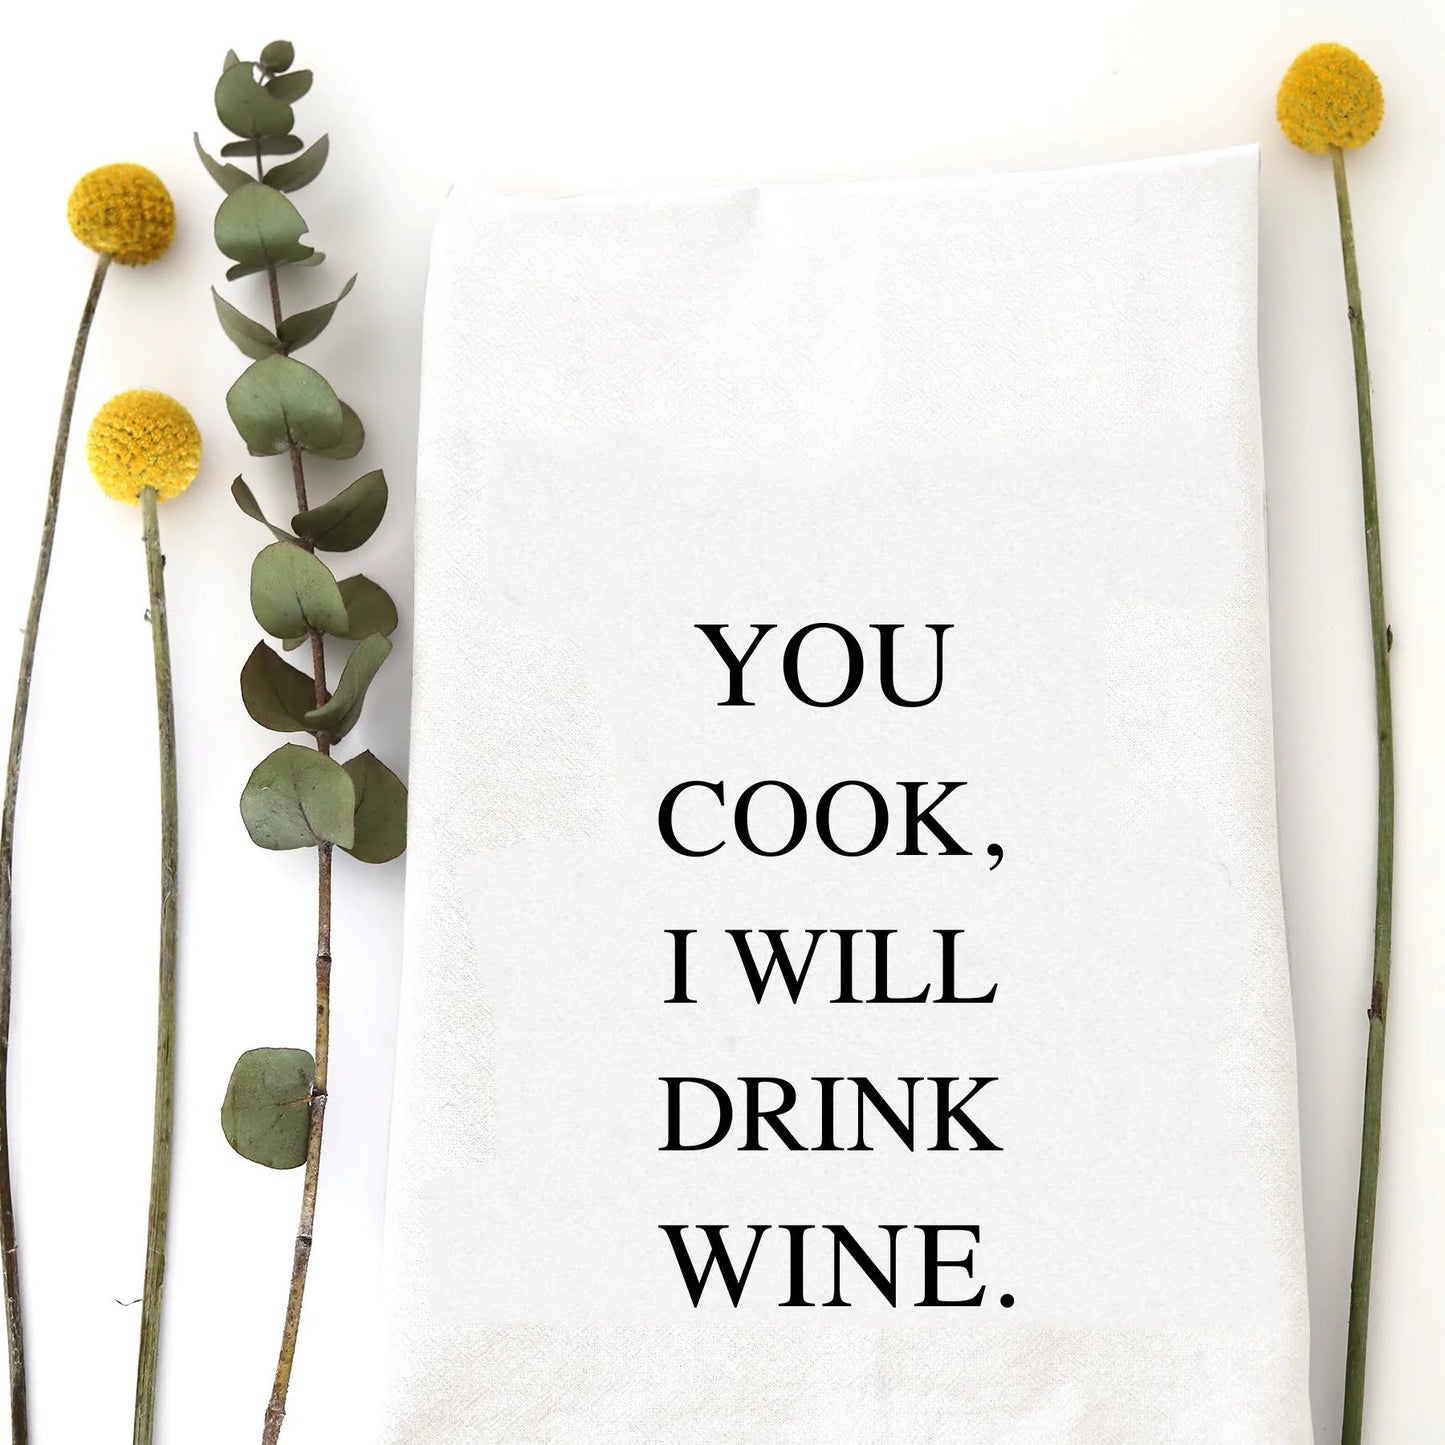 A tea towel with funny saying - you cook, I will drink wine.